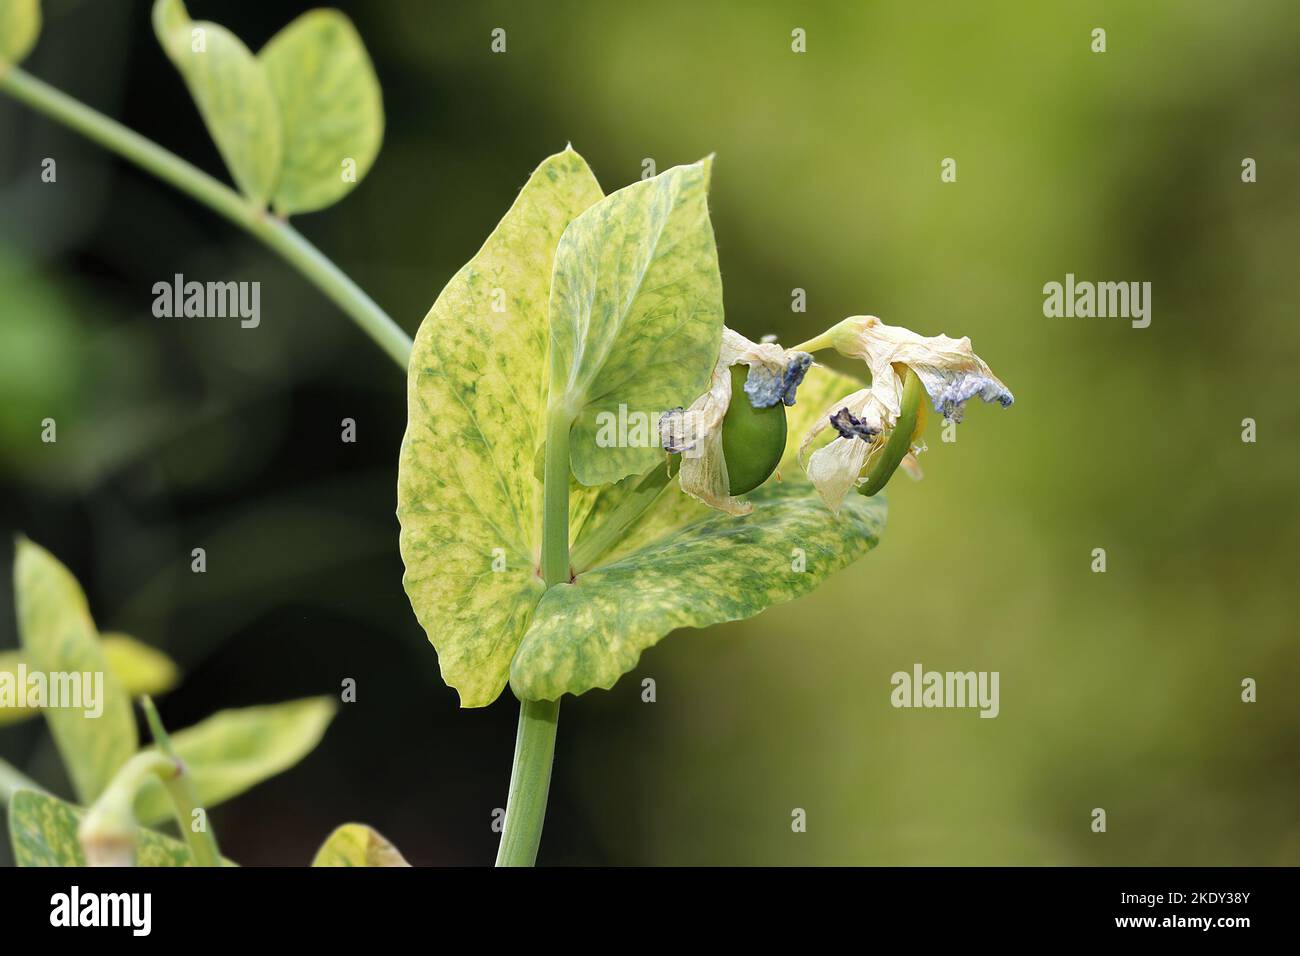 A viral disease of pea. The infected plant has mosaic and chlorotic yellow spots on the leaves. Symptoms of pea enation mosaic or yellow bean mosaic. Stock Photo